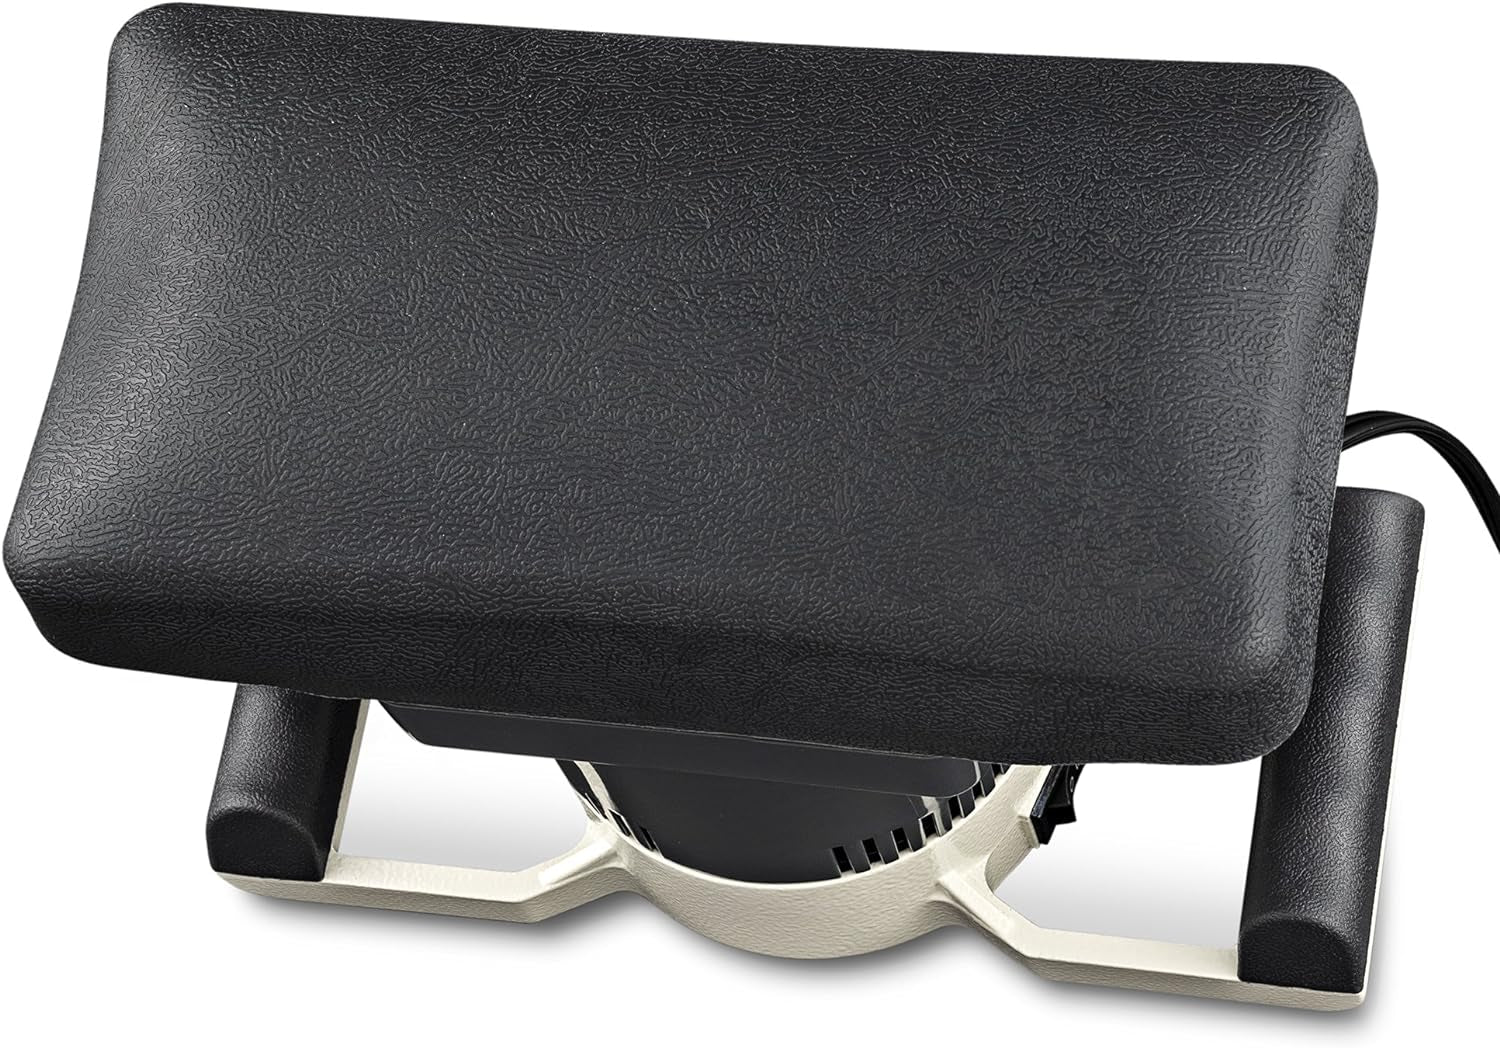 Chiropractic Massager - 2 Speed Body Relaxer